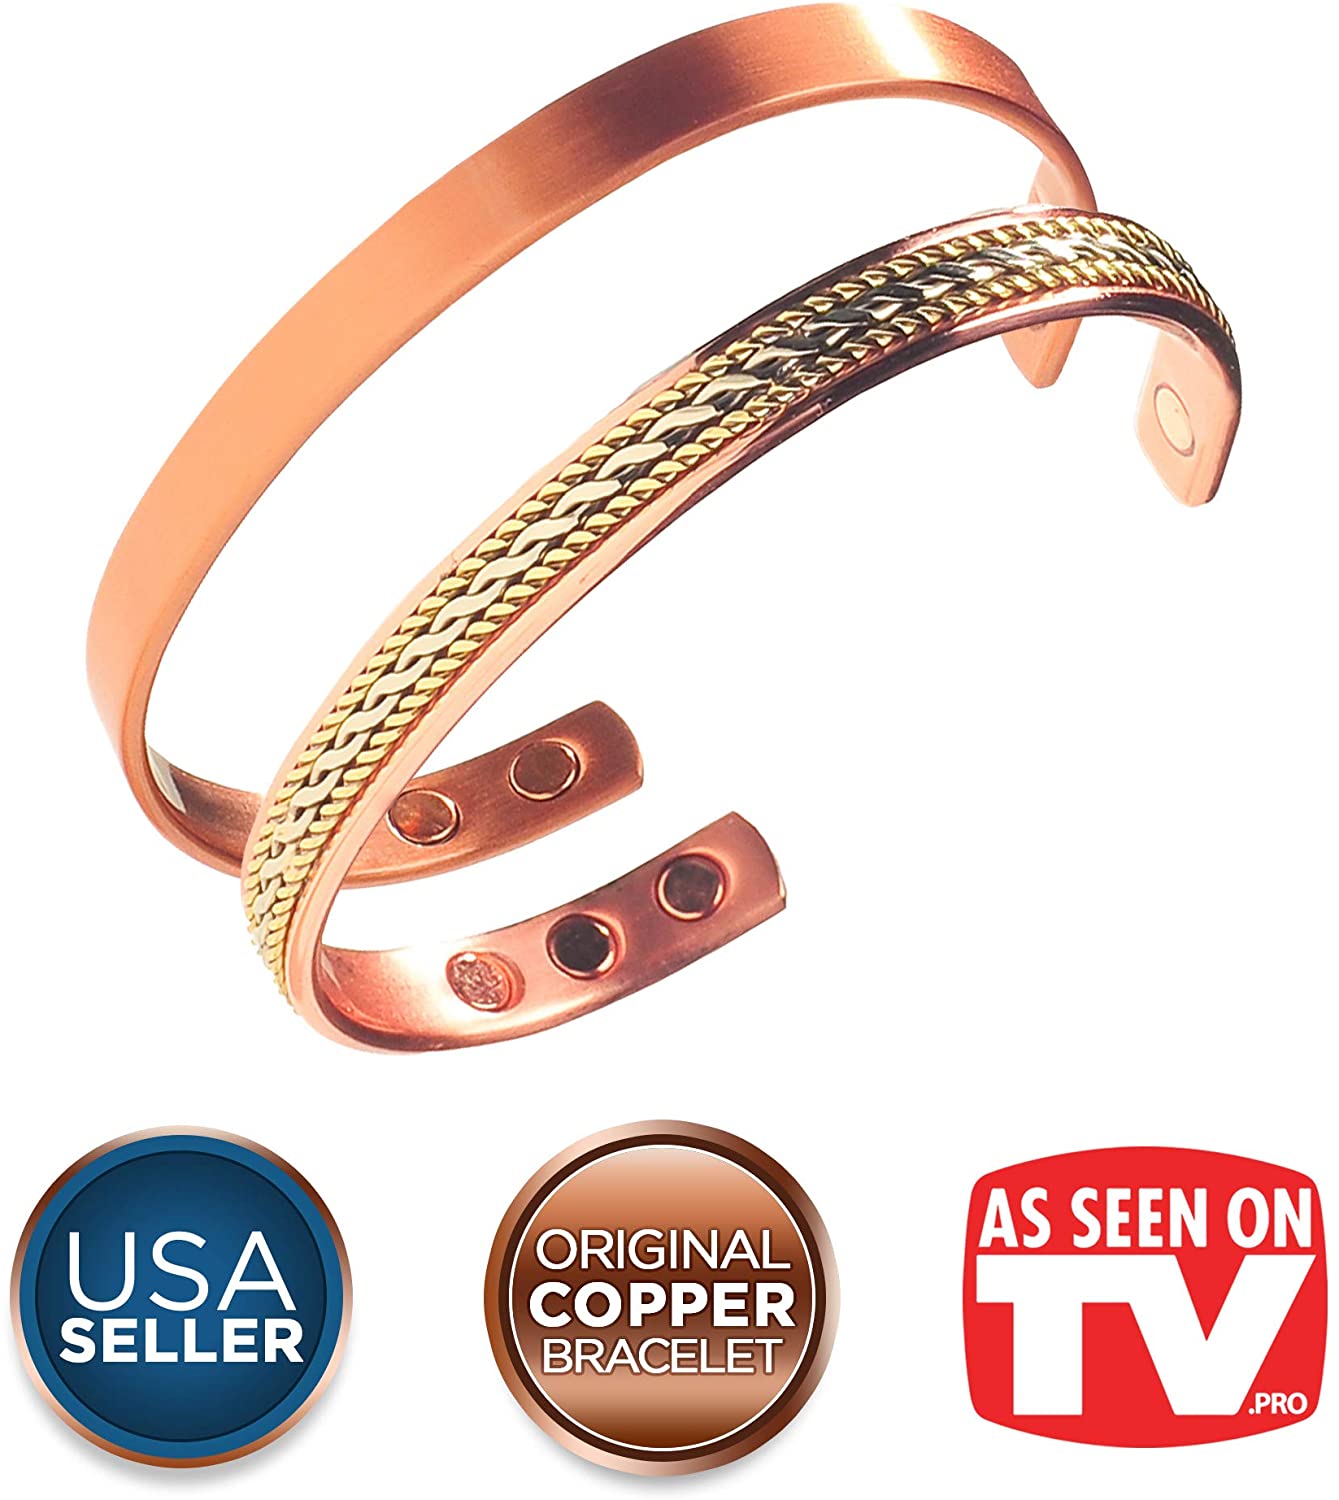 Earth Therapy Mens Pure Copper Magentic Healing Golf Bracelets